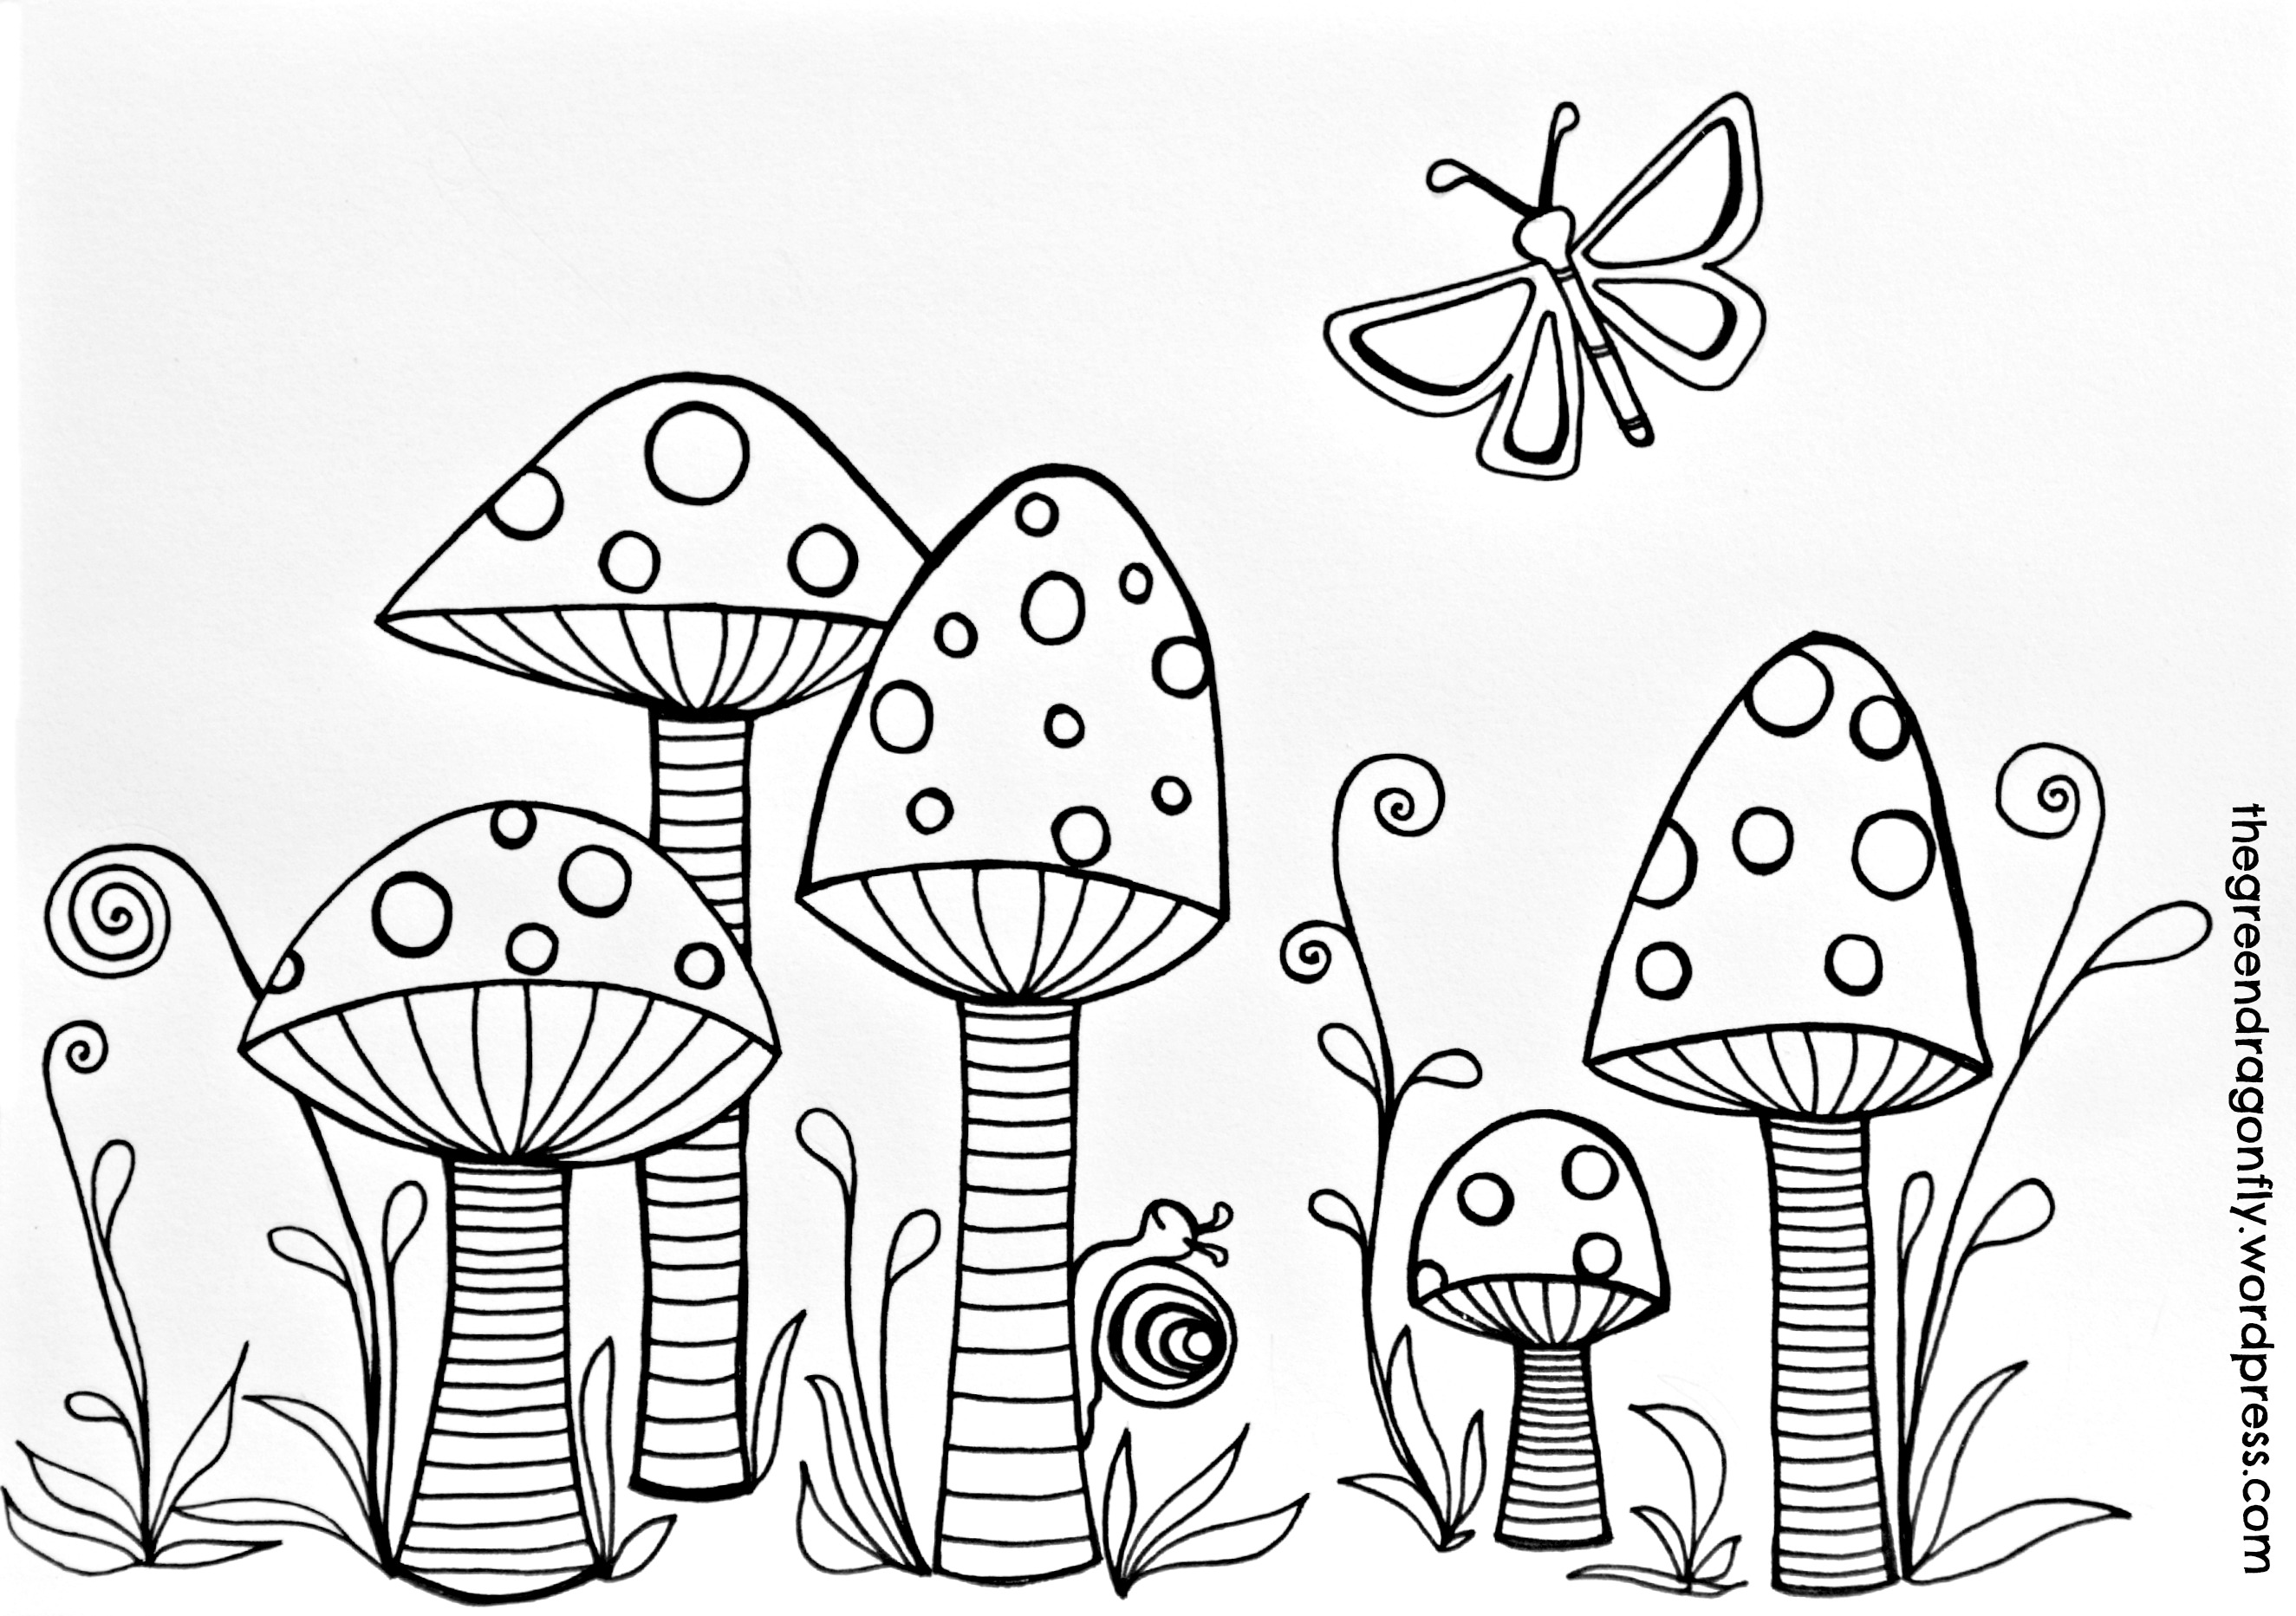 Toadstools coloring page – The Green Dragonfly